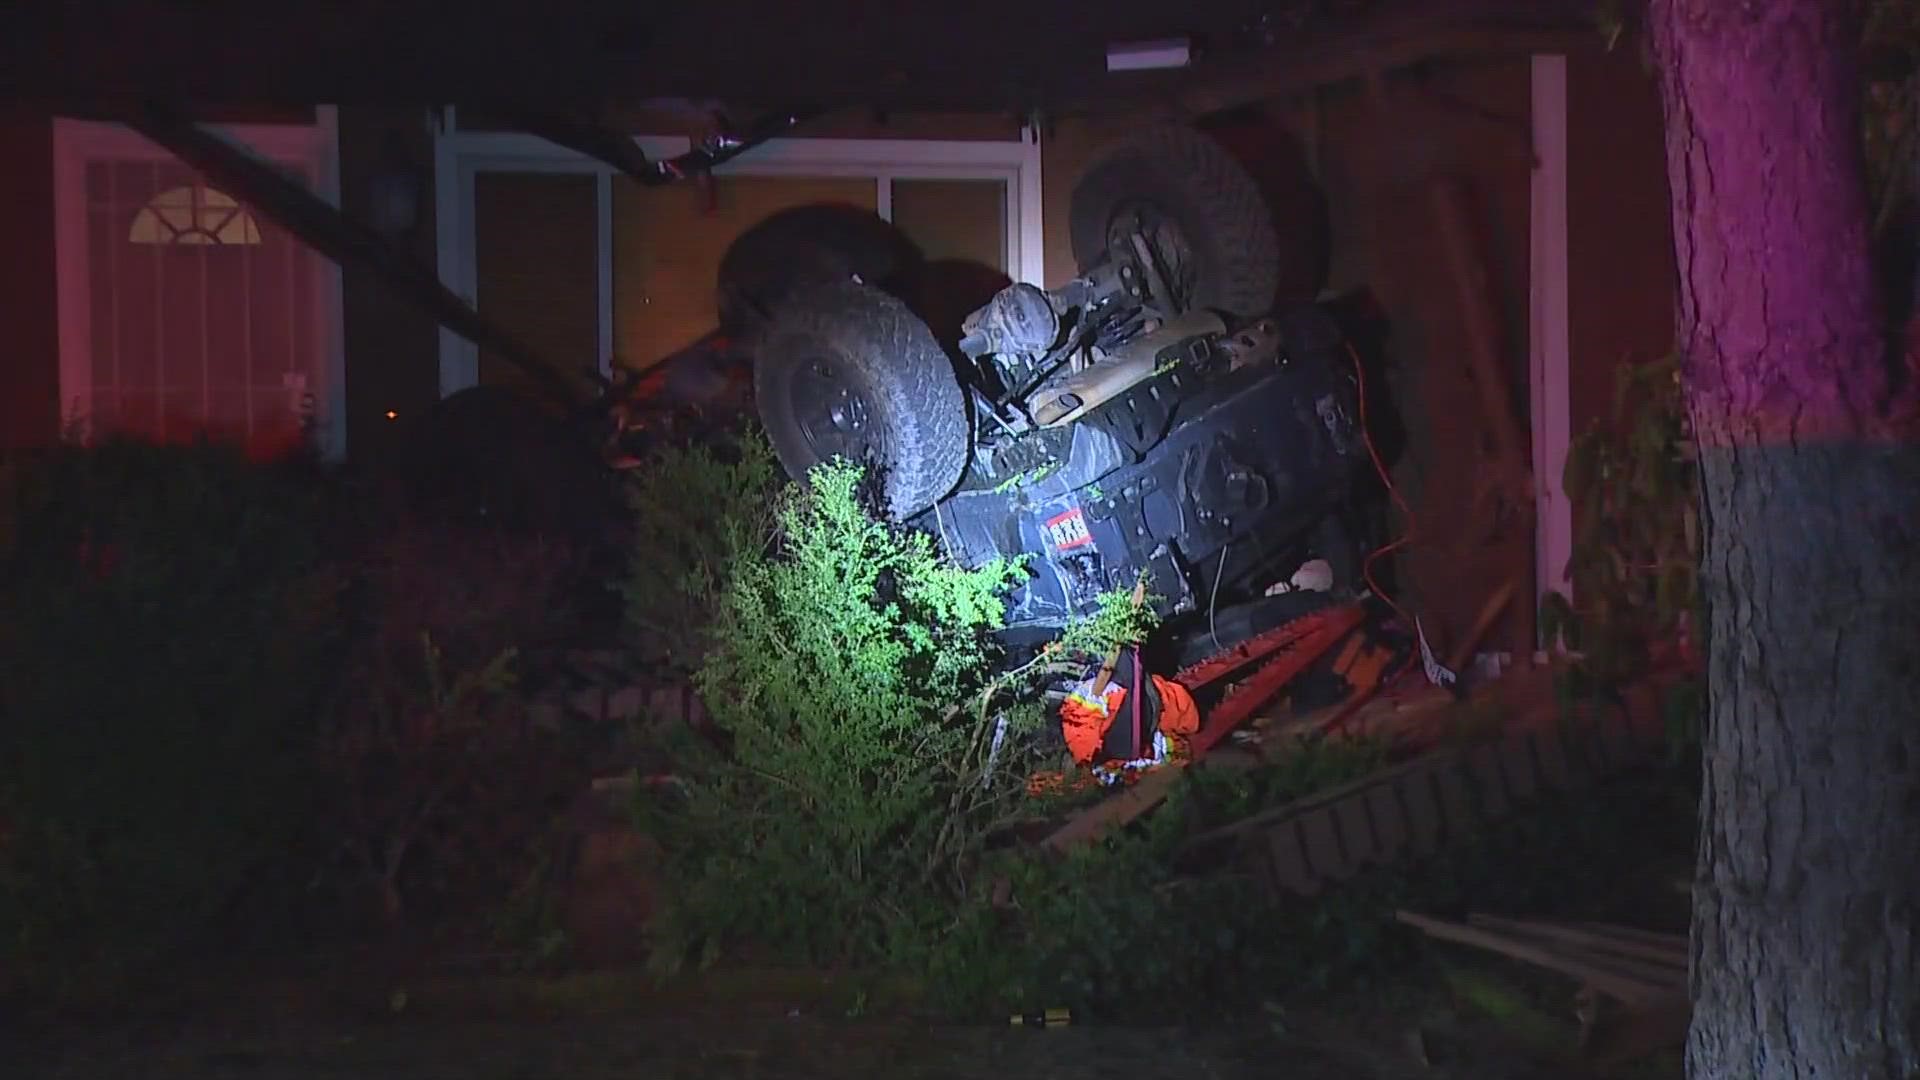 Deputies say the Jeep hit a ditch and lost control. They do not believe the driver was impaired in any way.